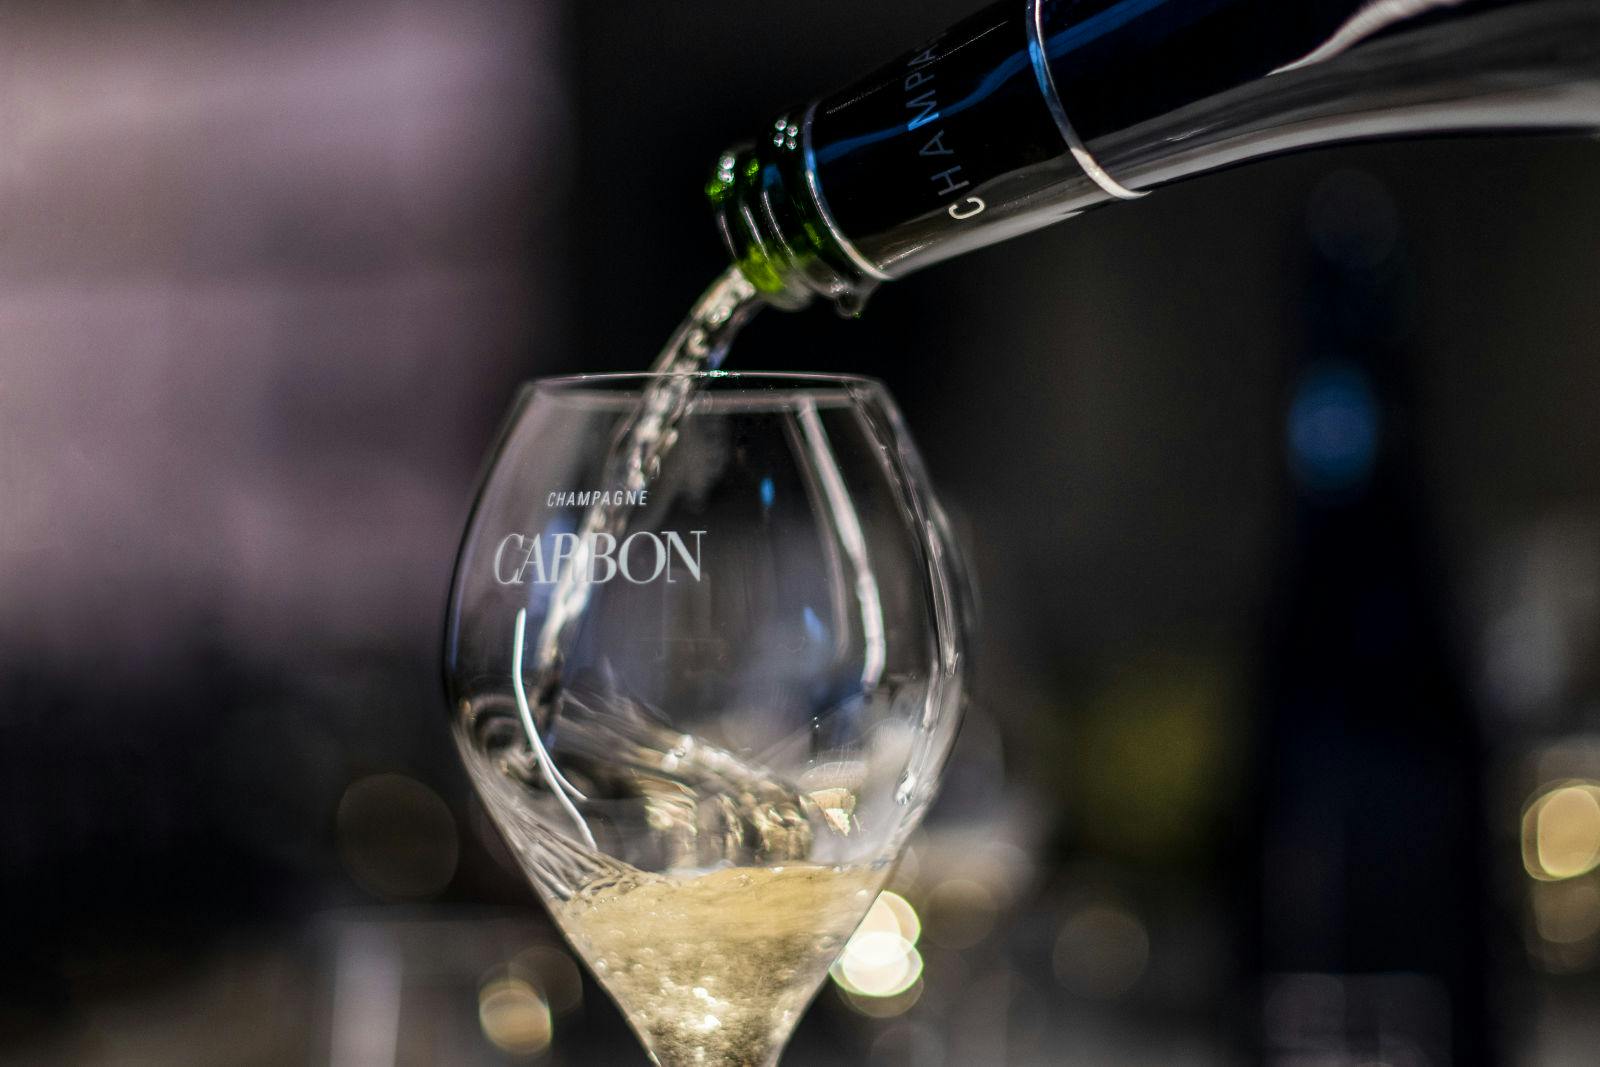 Champagne Carbon was created in Champillon in 2011 by Alexandre Mea, heir to the Devavry family.
